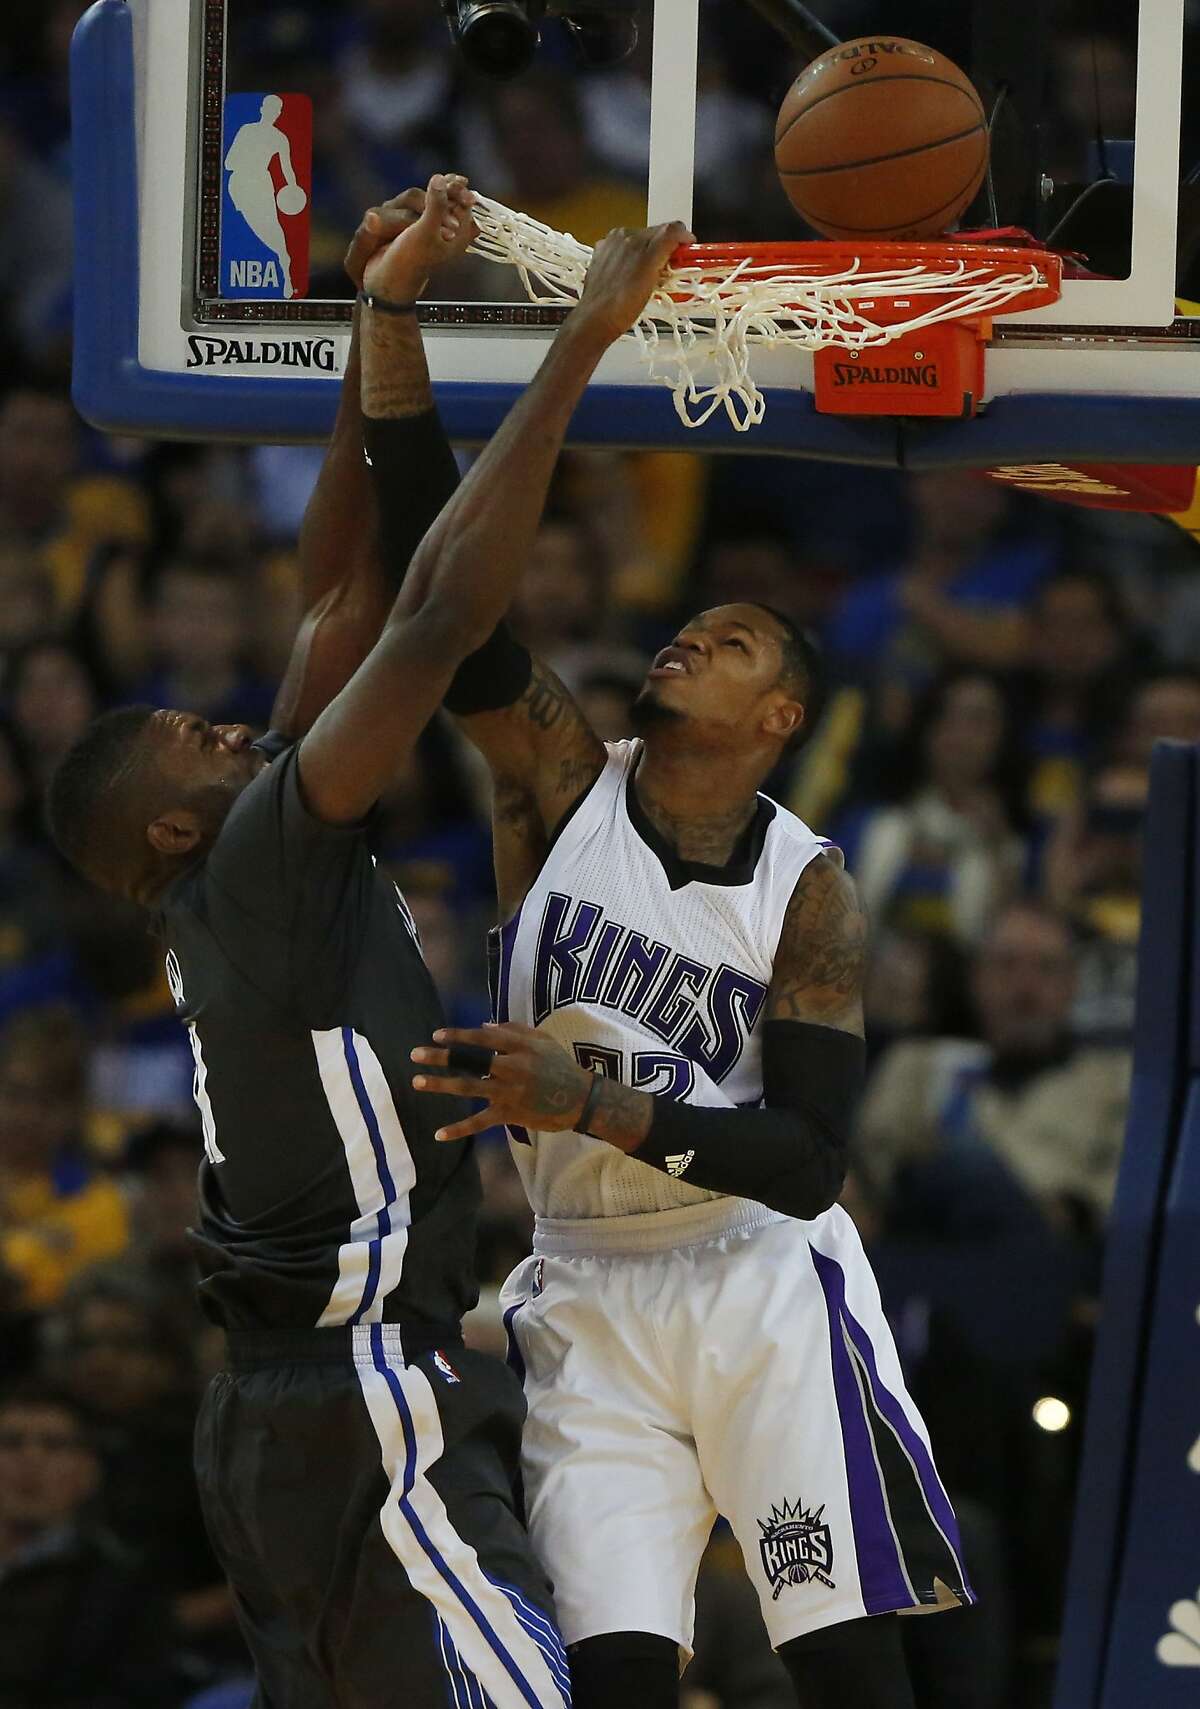 Warriors' Festus Ezeli attempts a slam dunk as the Kings' Ben McLemore attempts a block during the Golden State Warriors vs. the Sacramento Kings game in Oracle Arena Nov. 28, 2015 in Oakland, Calif.